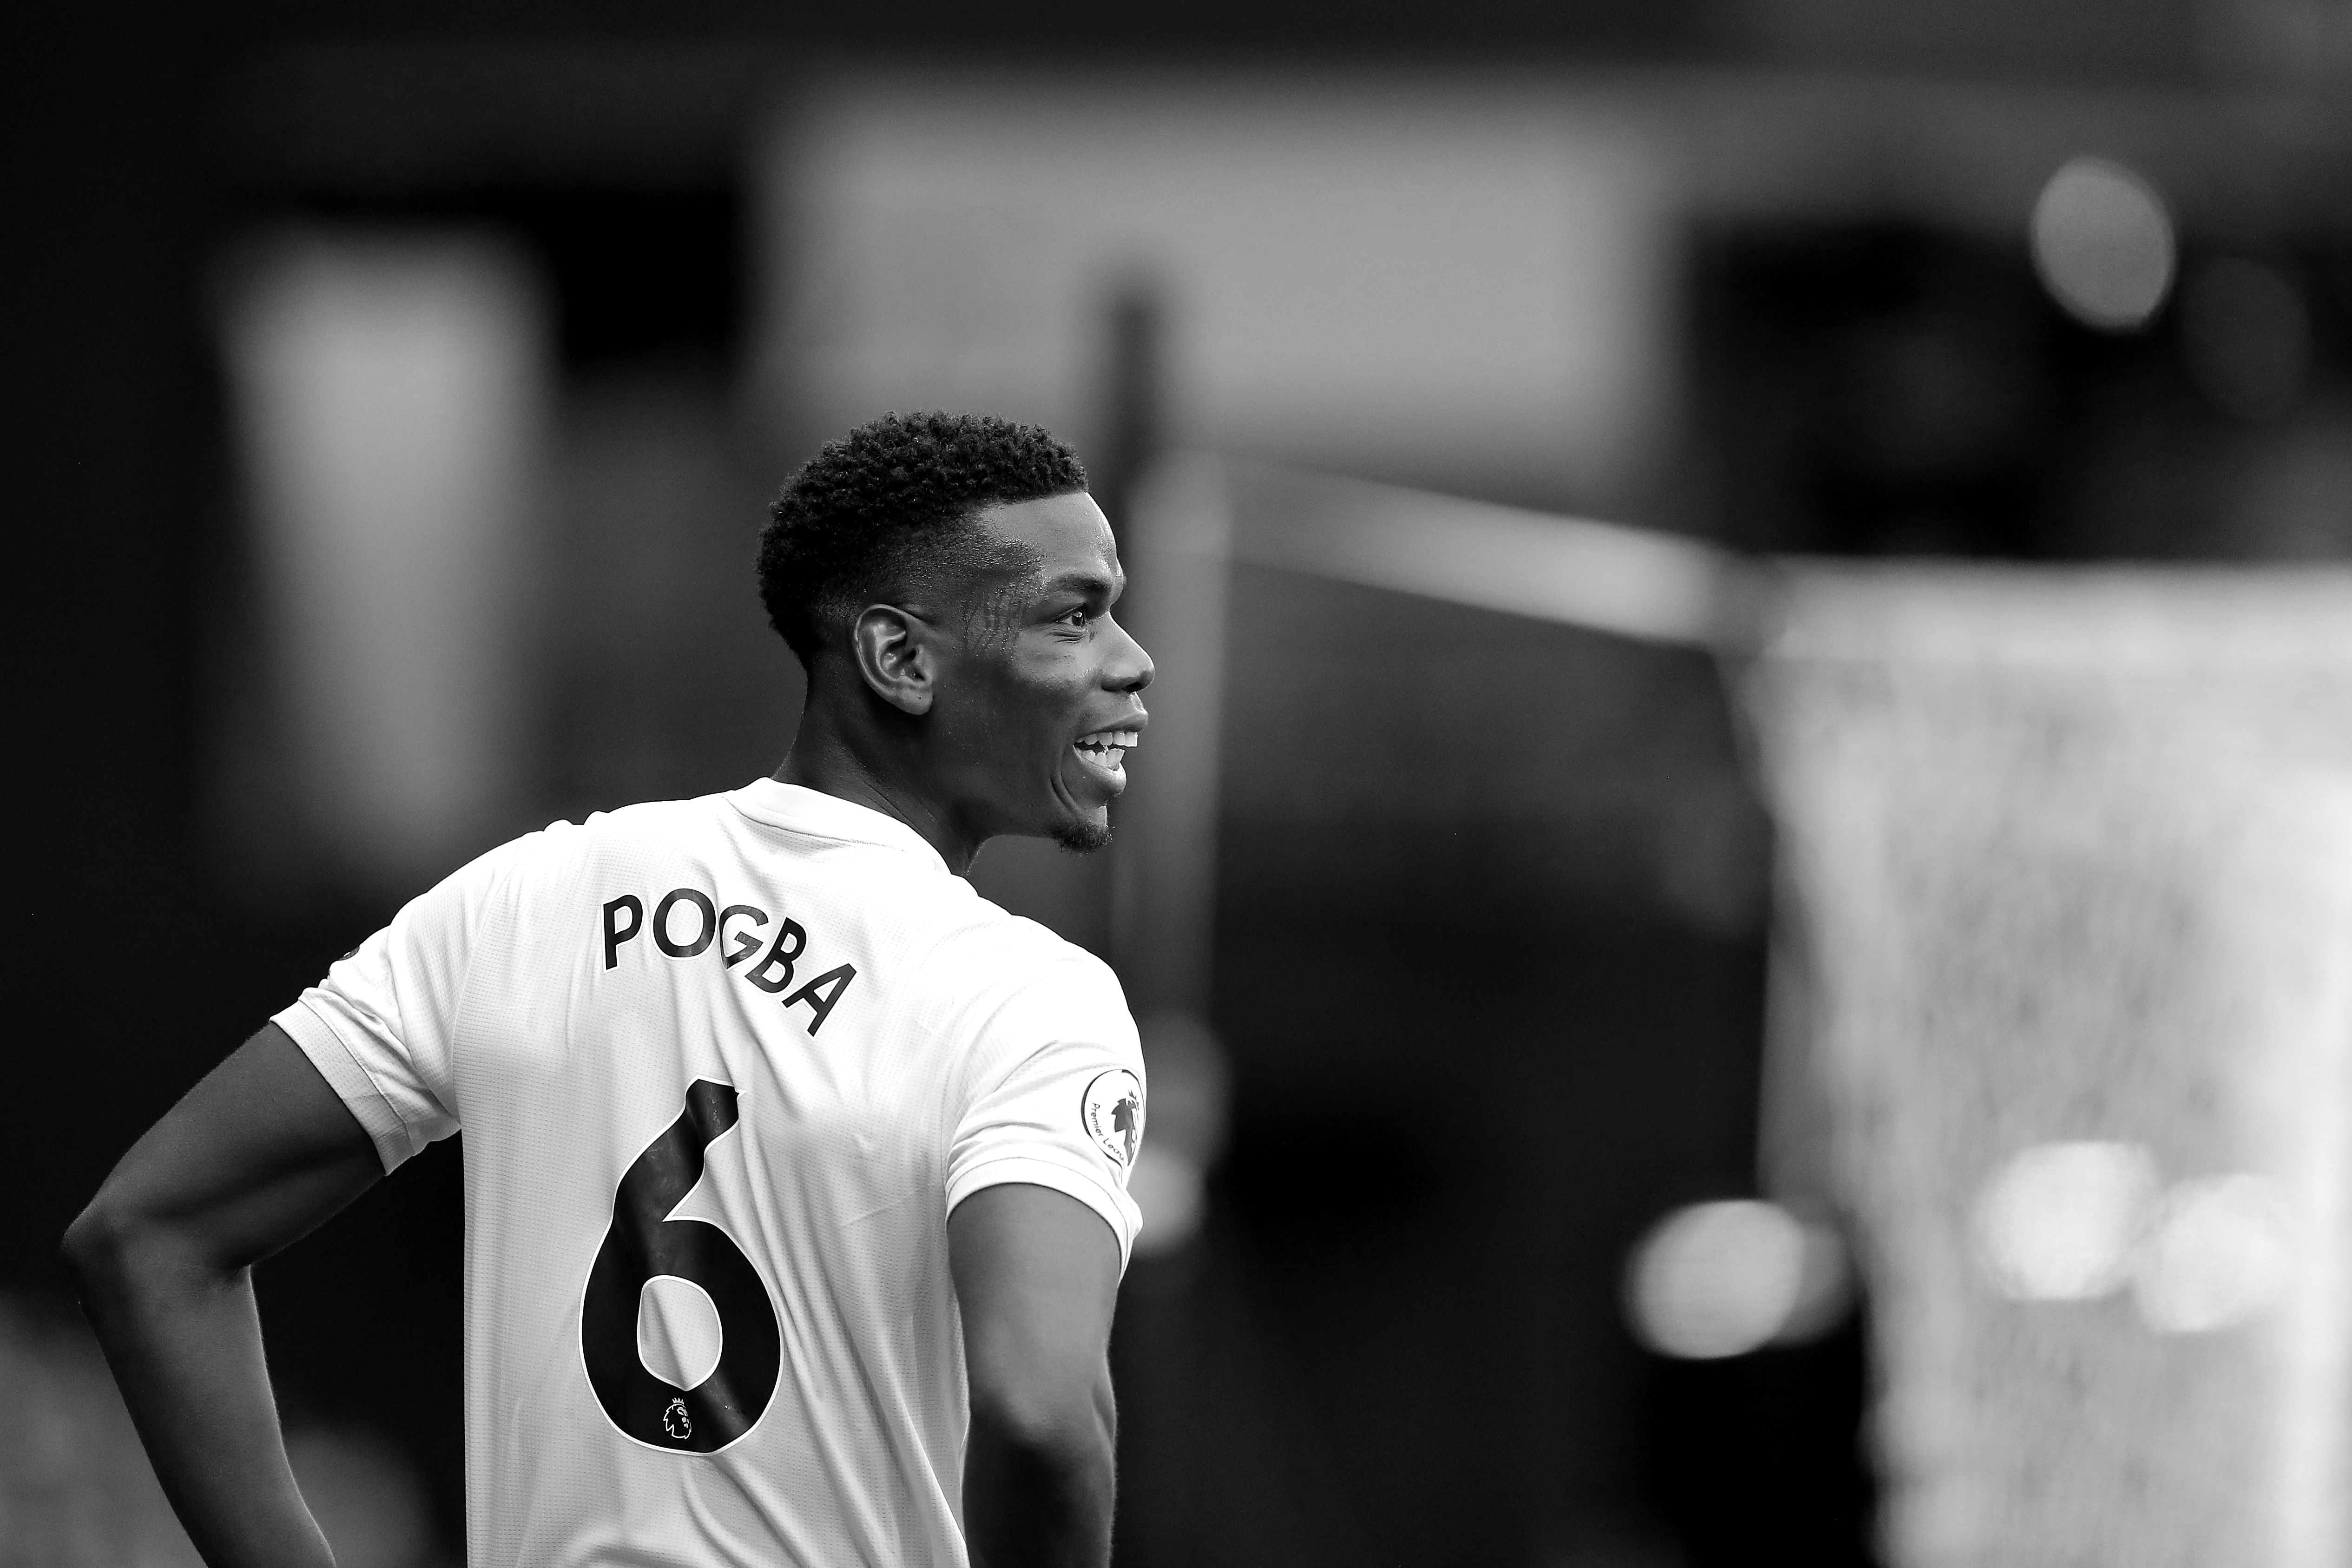 WATFORD, ENGLAND - SEPTEMBER 15: (EDITORS NOTE: THIS IMAGE HAS BEEN CONVERTED TO BLACK & WHITE) Paul Pogba of Manchester United in action during the Premier League match between Watford FC and Manchester United at Vicarage Road on September 15, 2018 in Watford, United Kingdom. (Photo by Richard Heathcote/Getty Images)